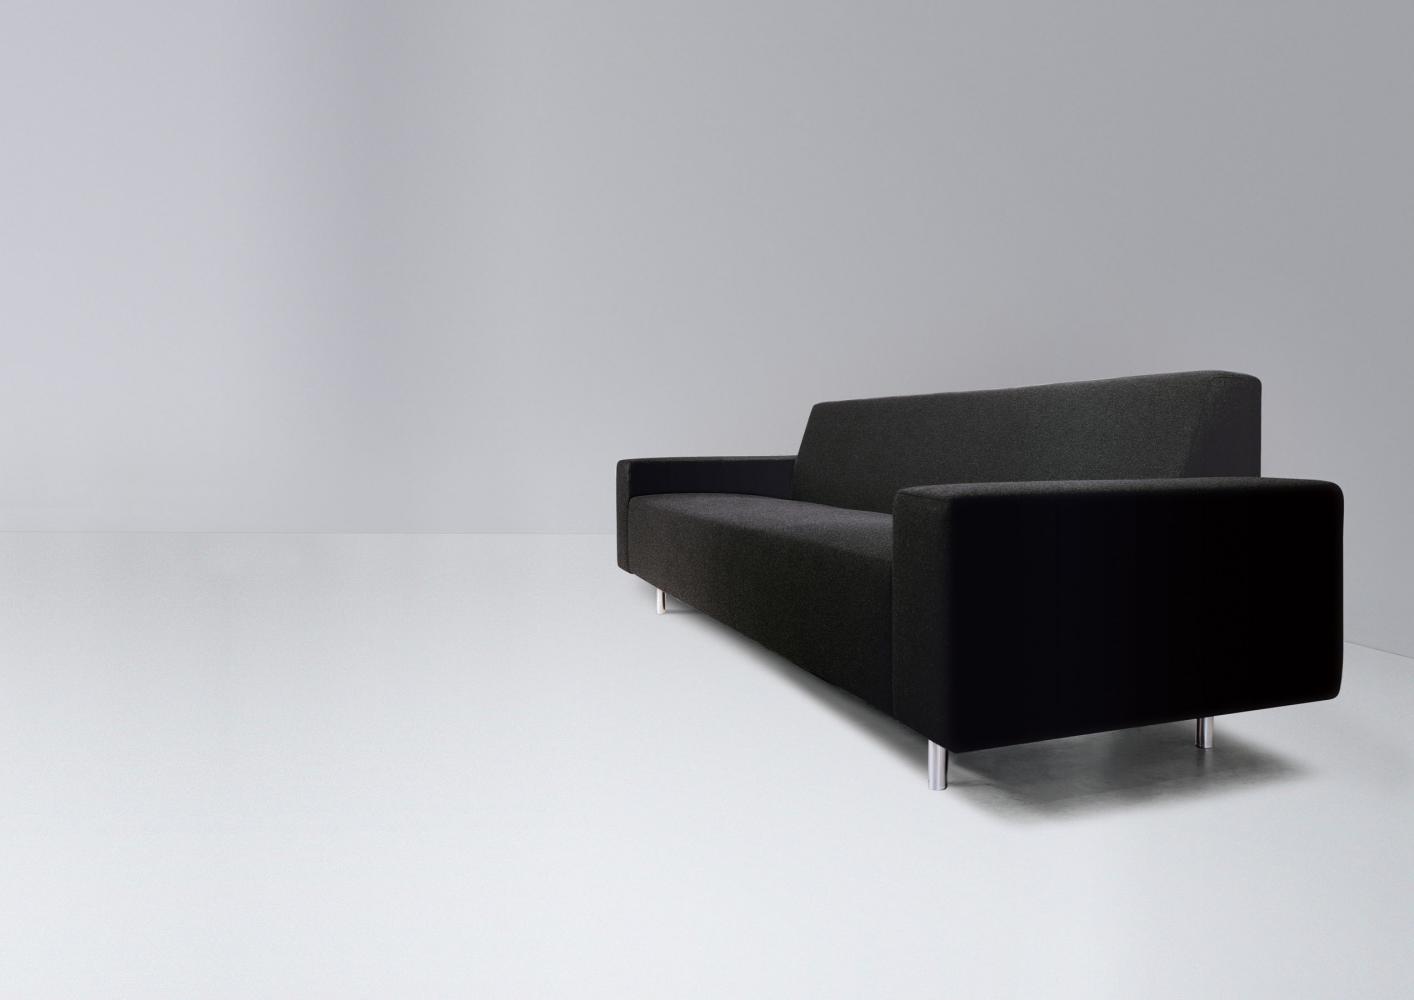 Presto is a modern sofa with minimal design available in leather, fabric or velvet